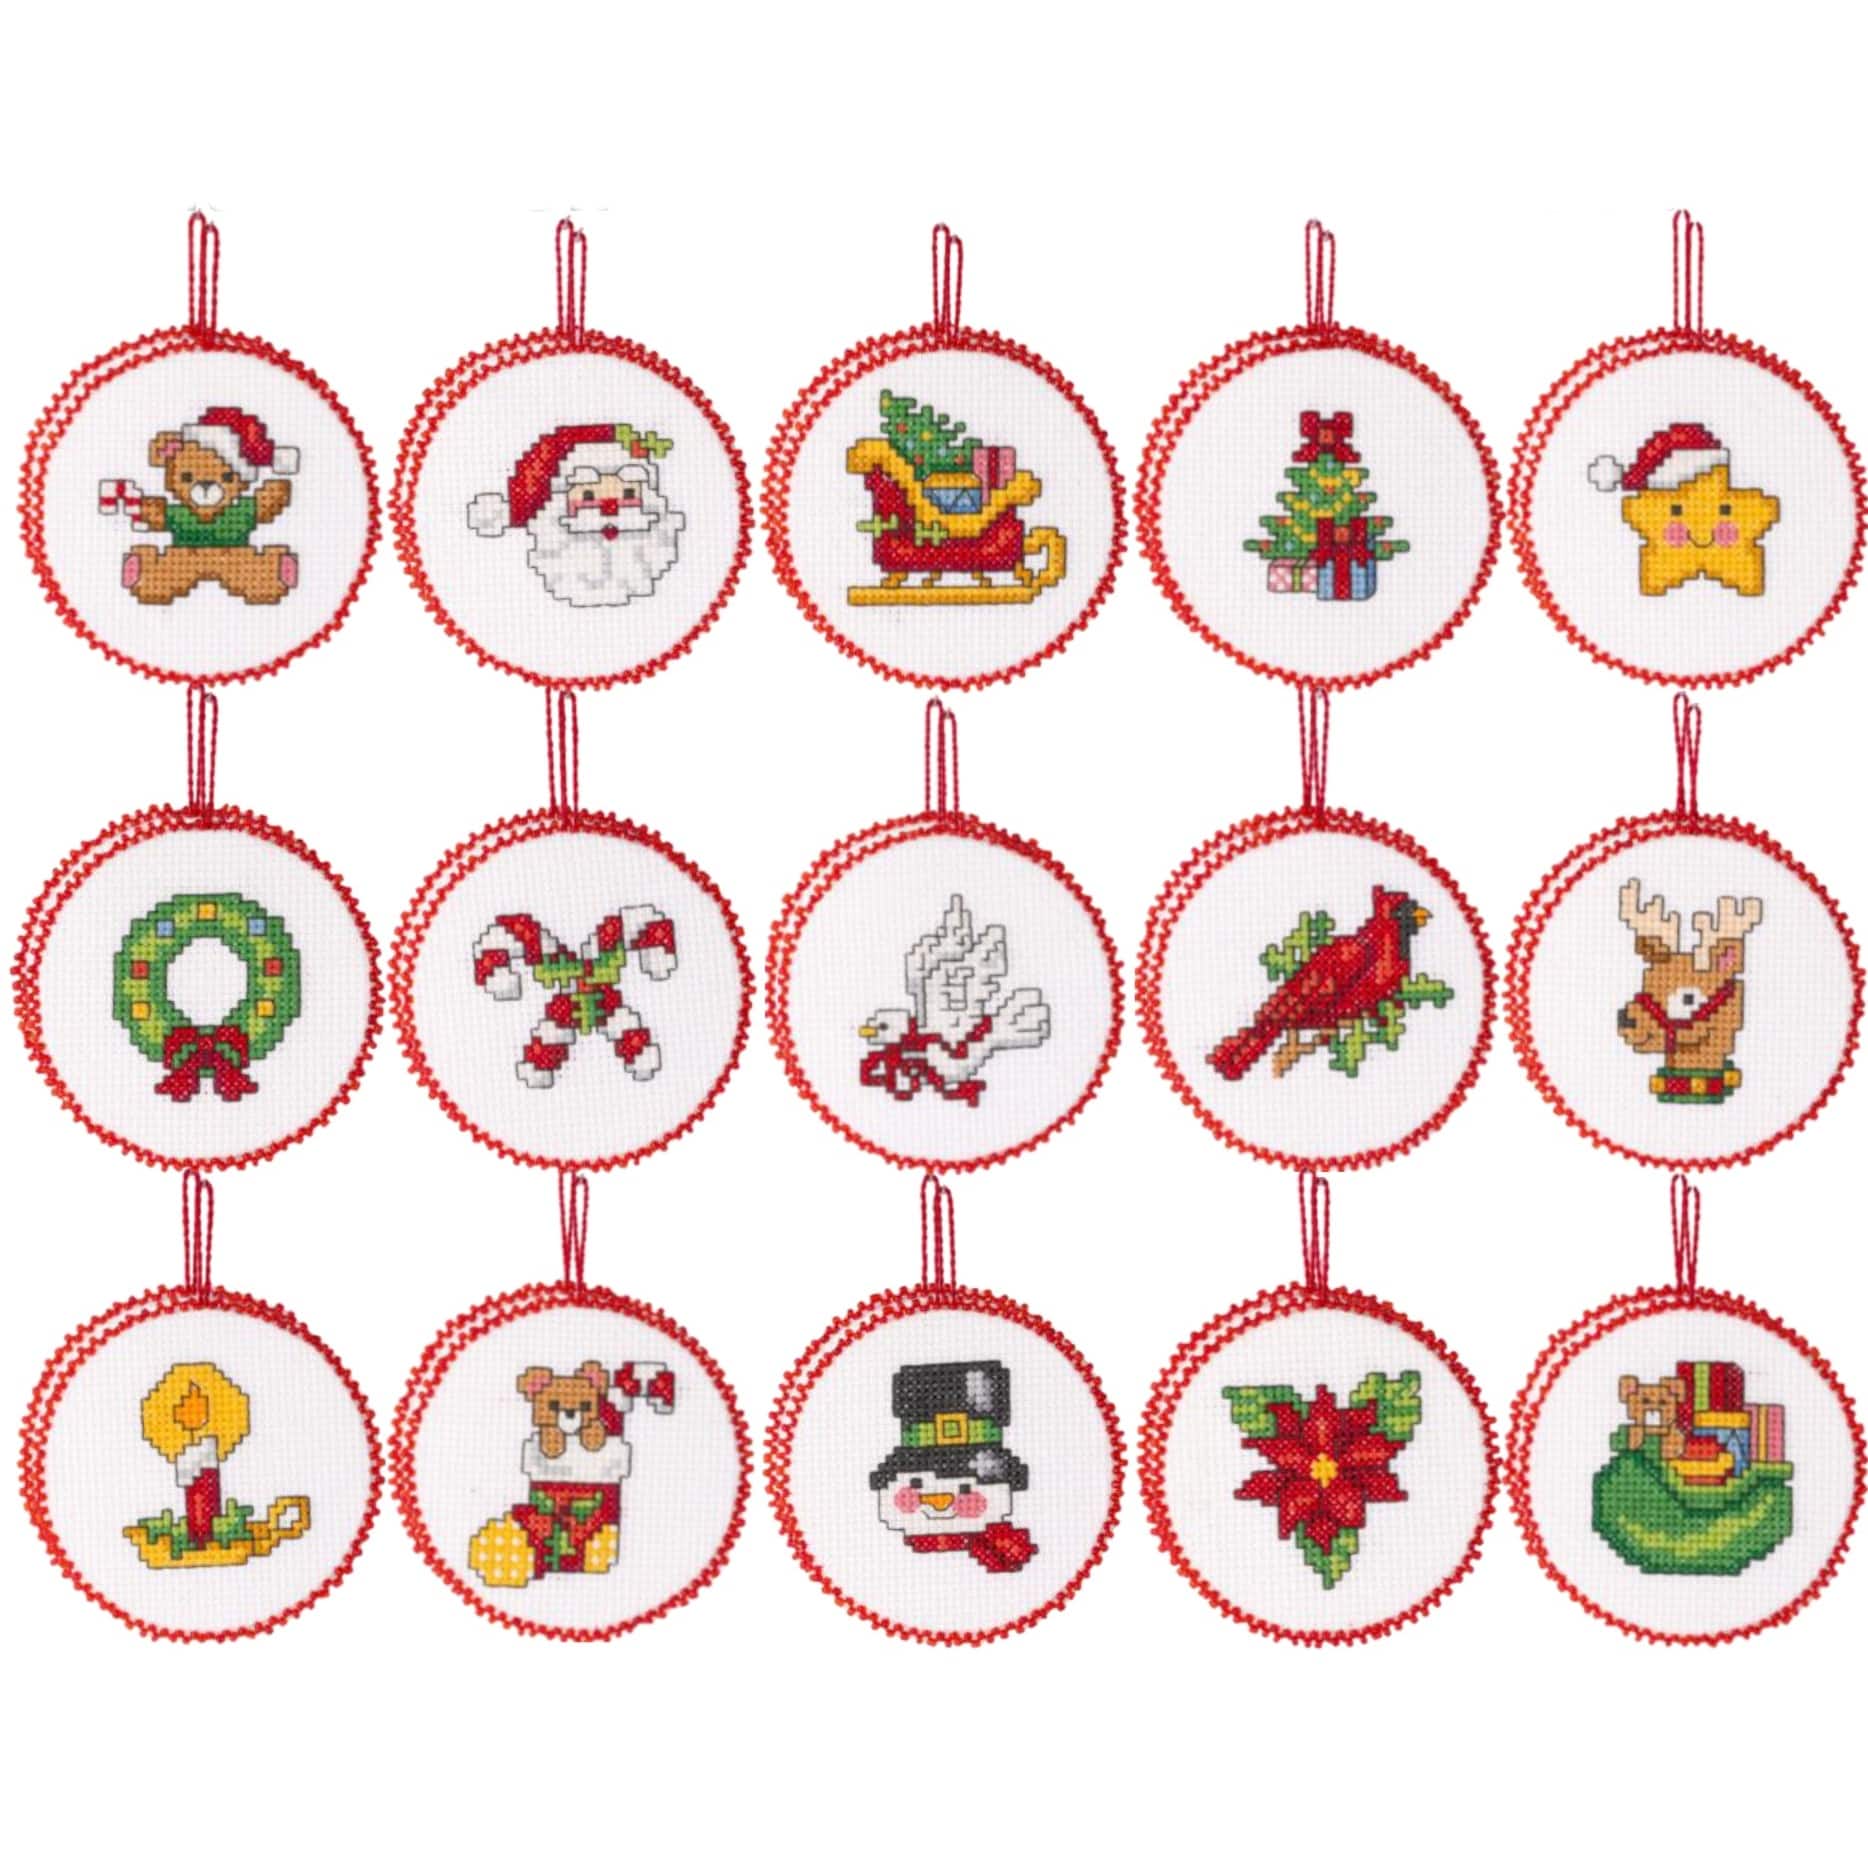 Bucilla Counted Cross Stitch Kit 2.75 Round 30/Pkg-Classic Christmas Ornaments